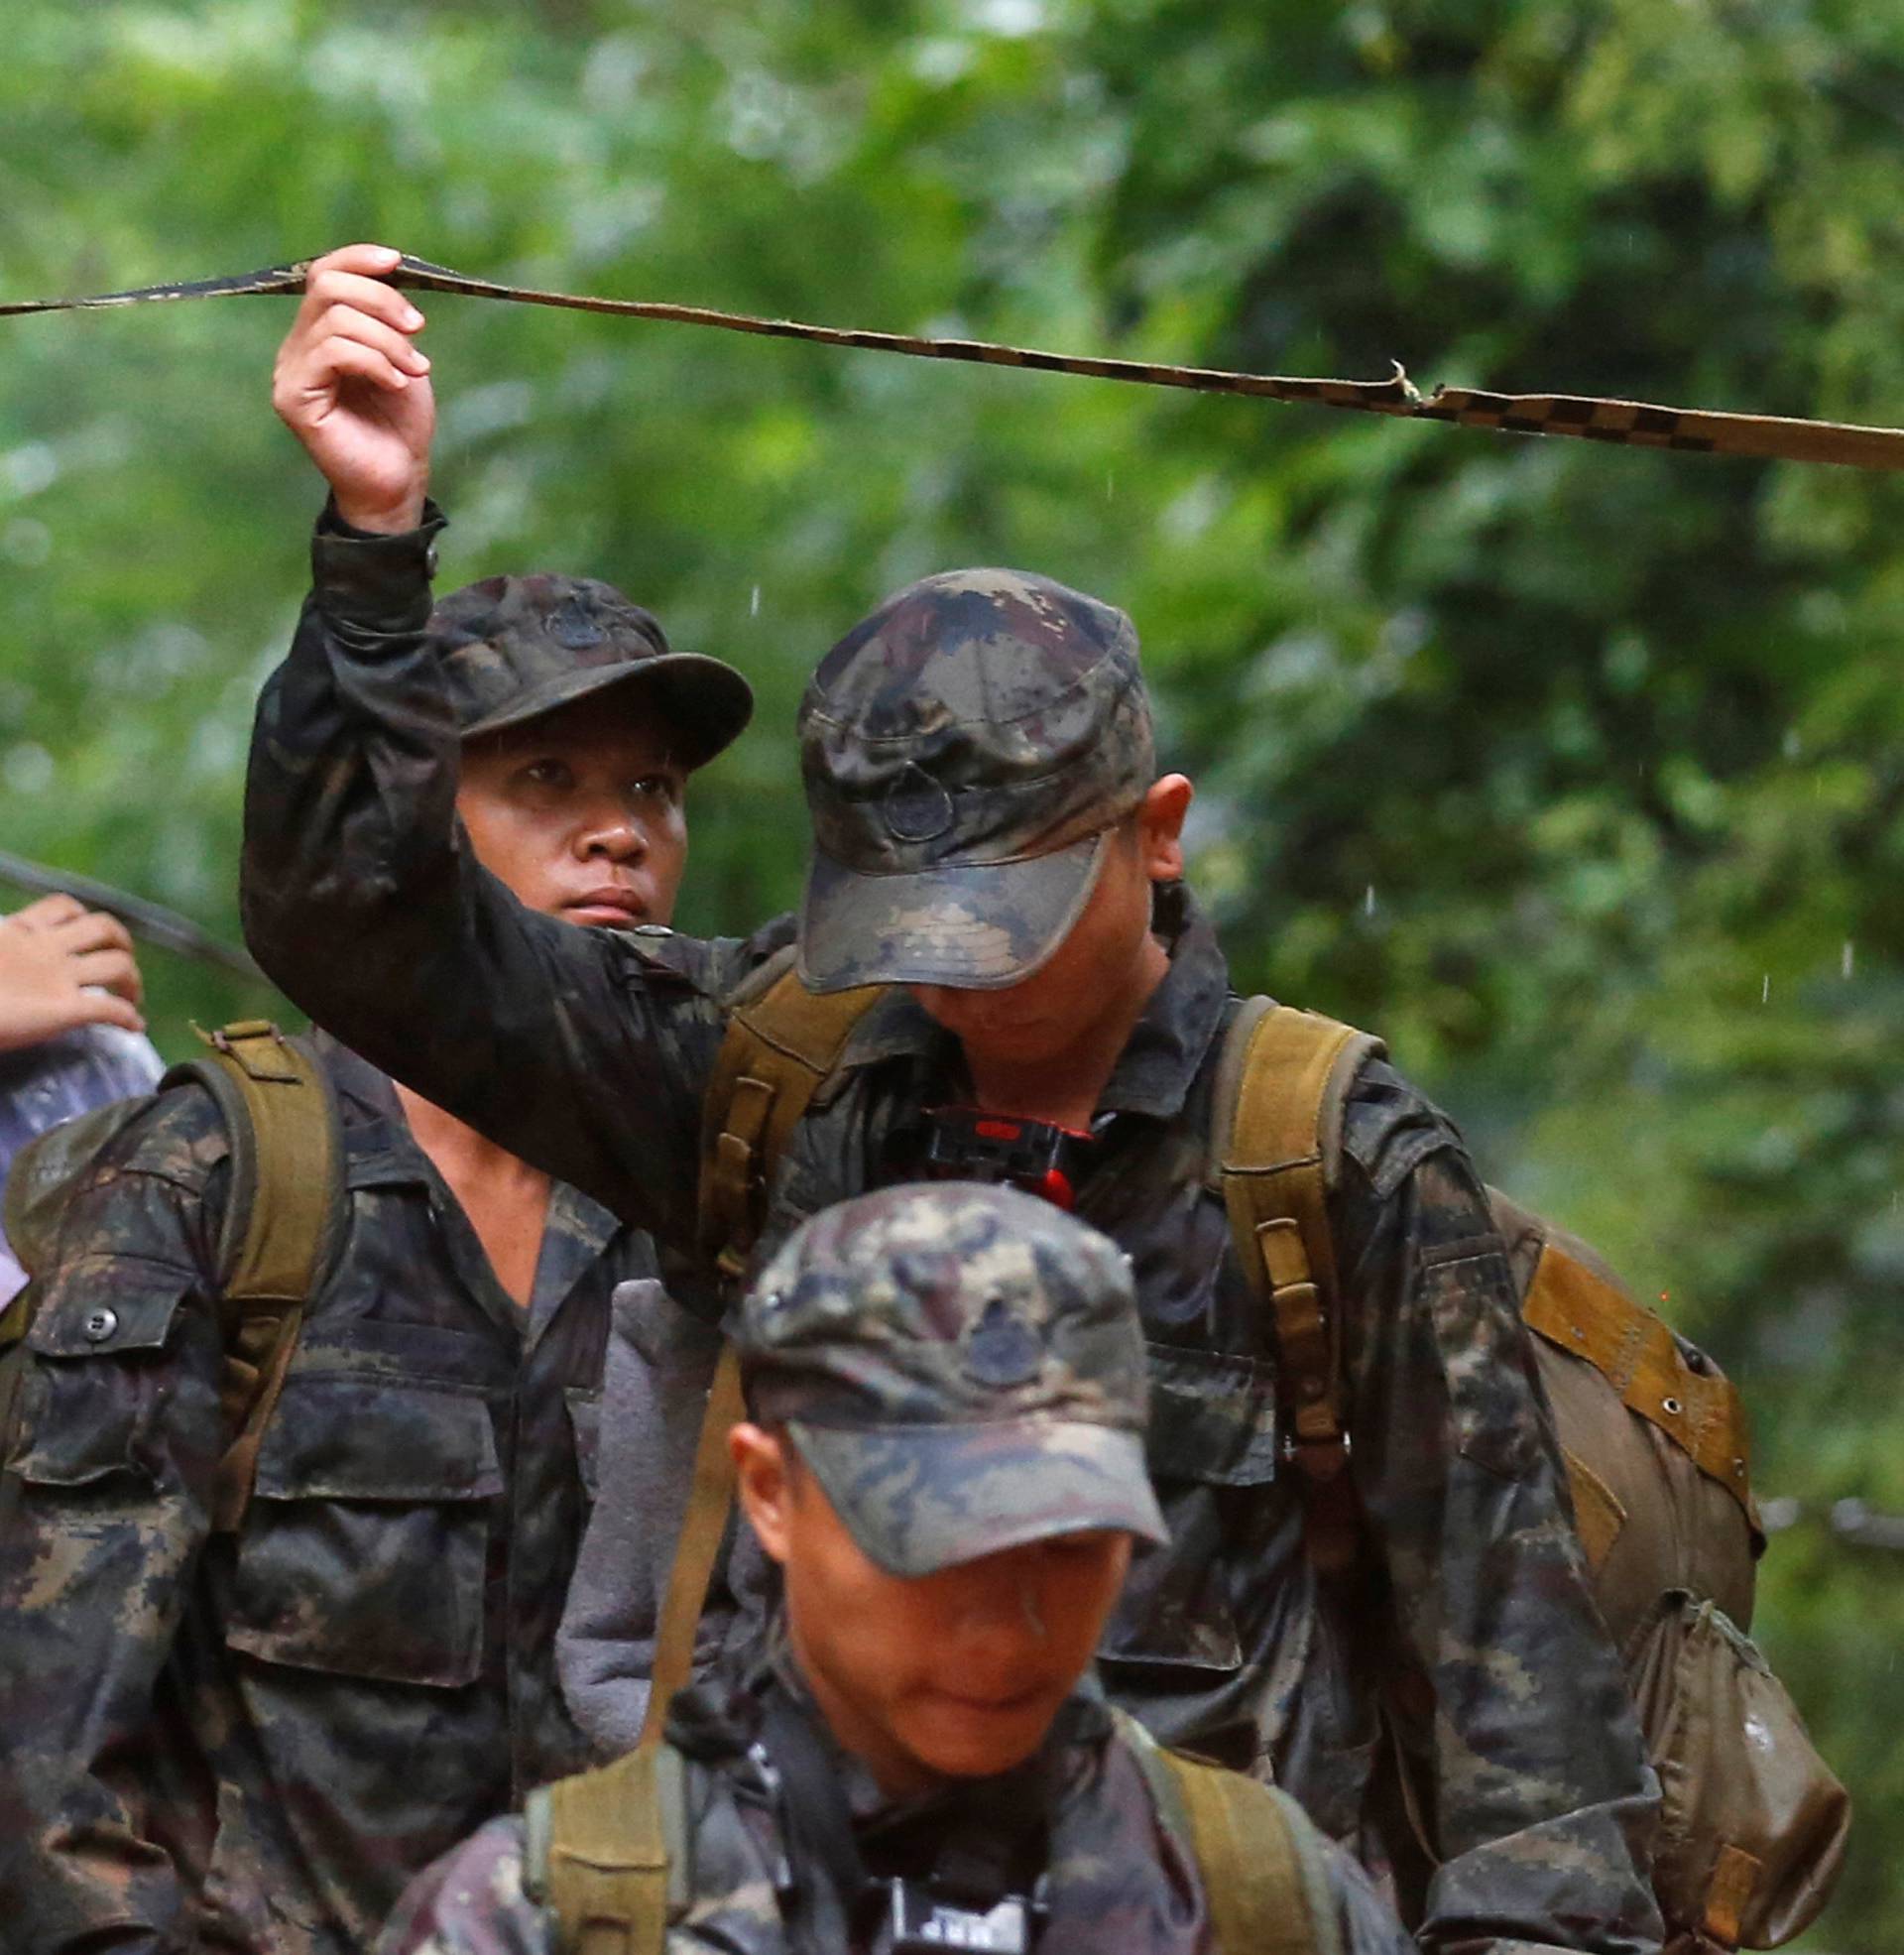 Soldiers work near Tham Luang caves during a search for 12 members of an under-16 soccer team and their coach, in the northern province of Chiang Rai